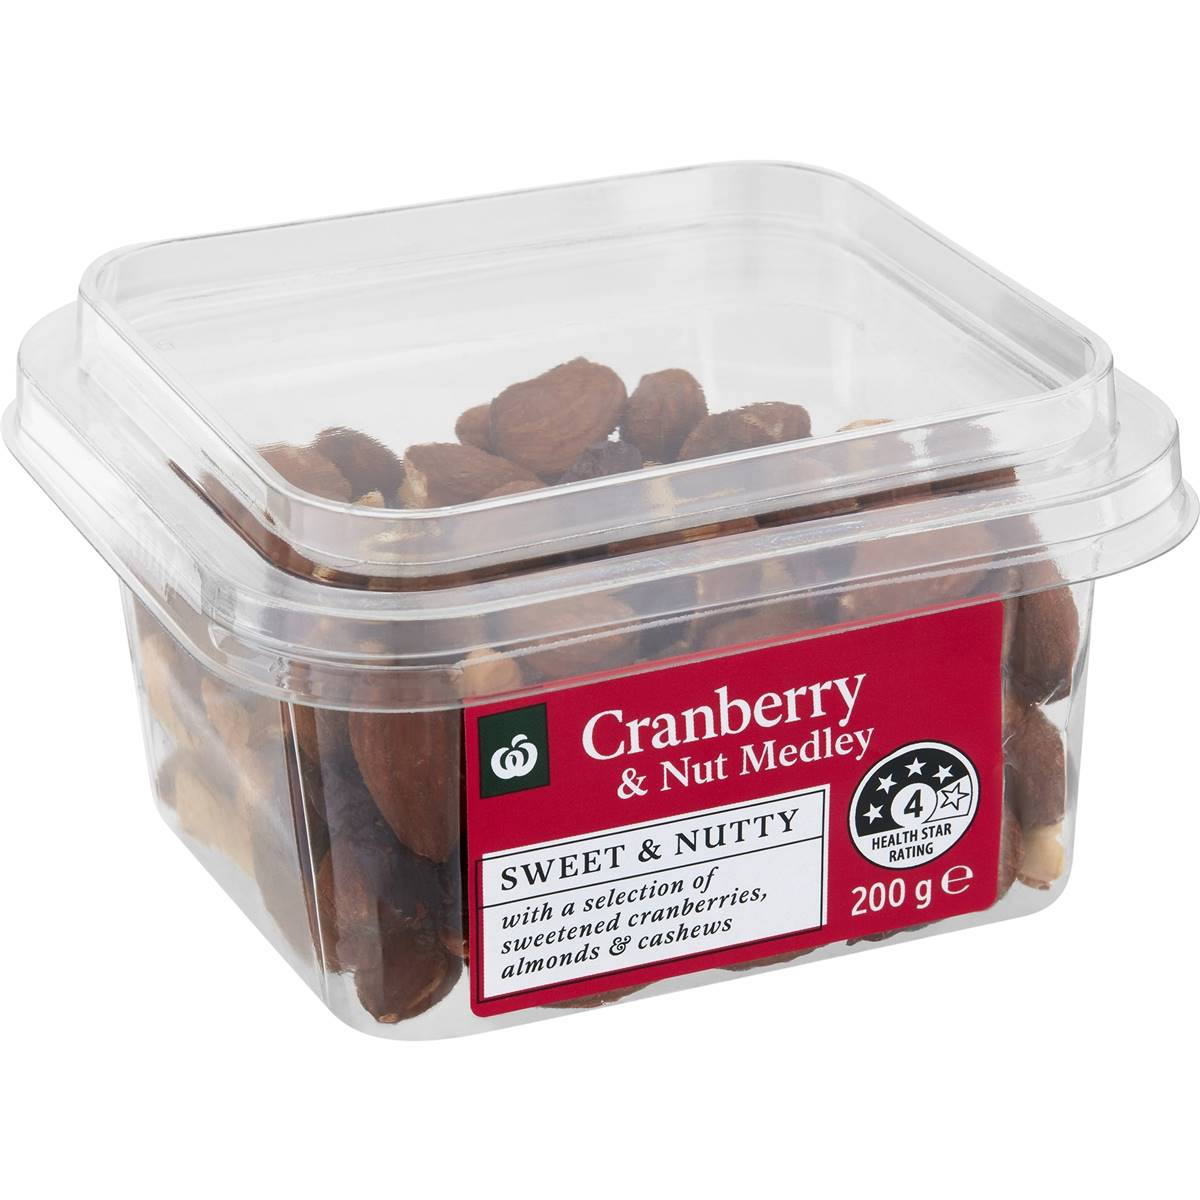 Calories in Woolworths Cranberry & Nut Mix